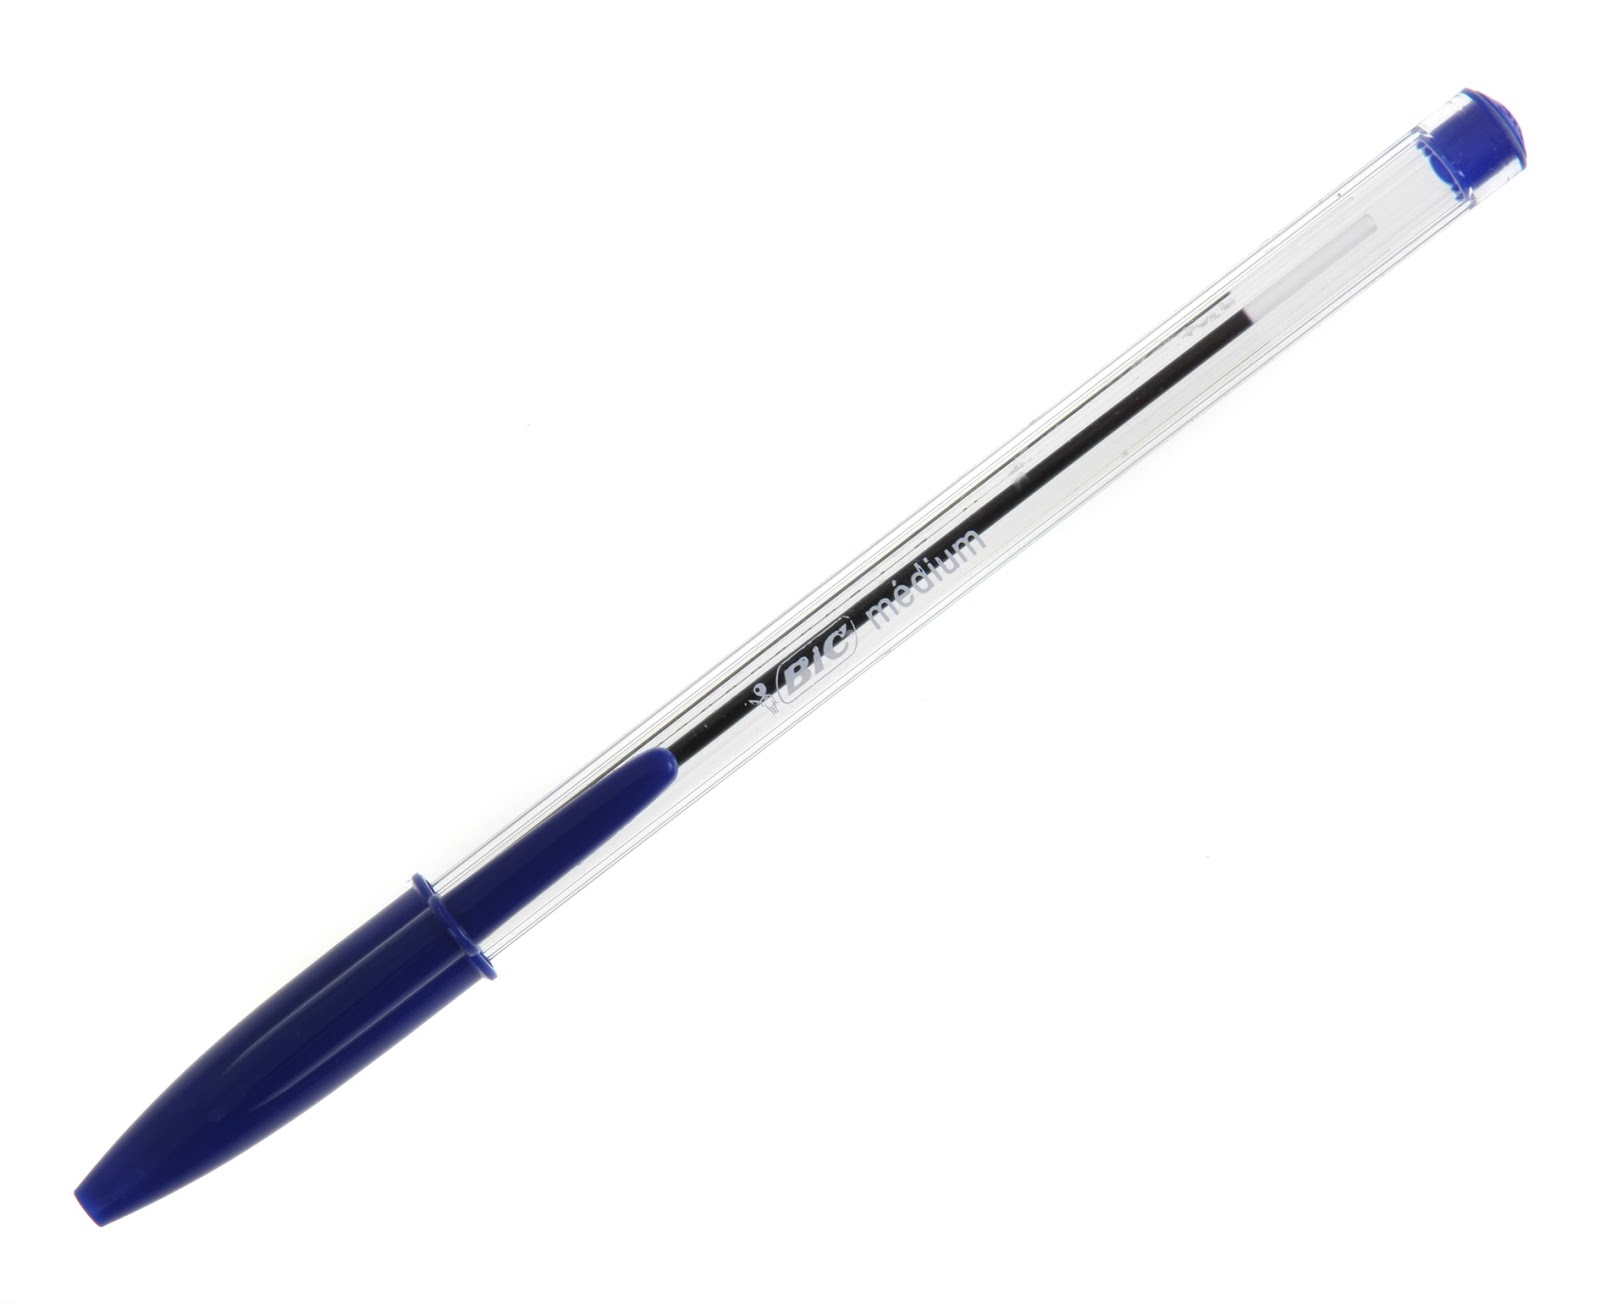 Ball Point Pens - History of Ball Point Pens